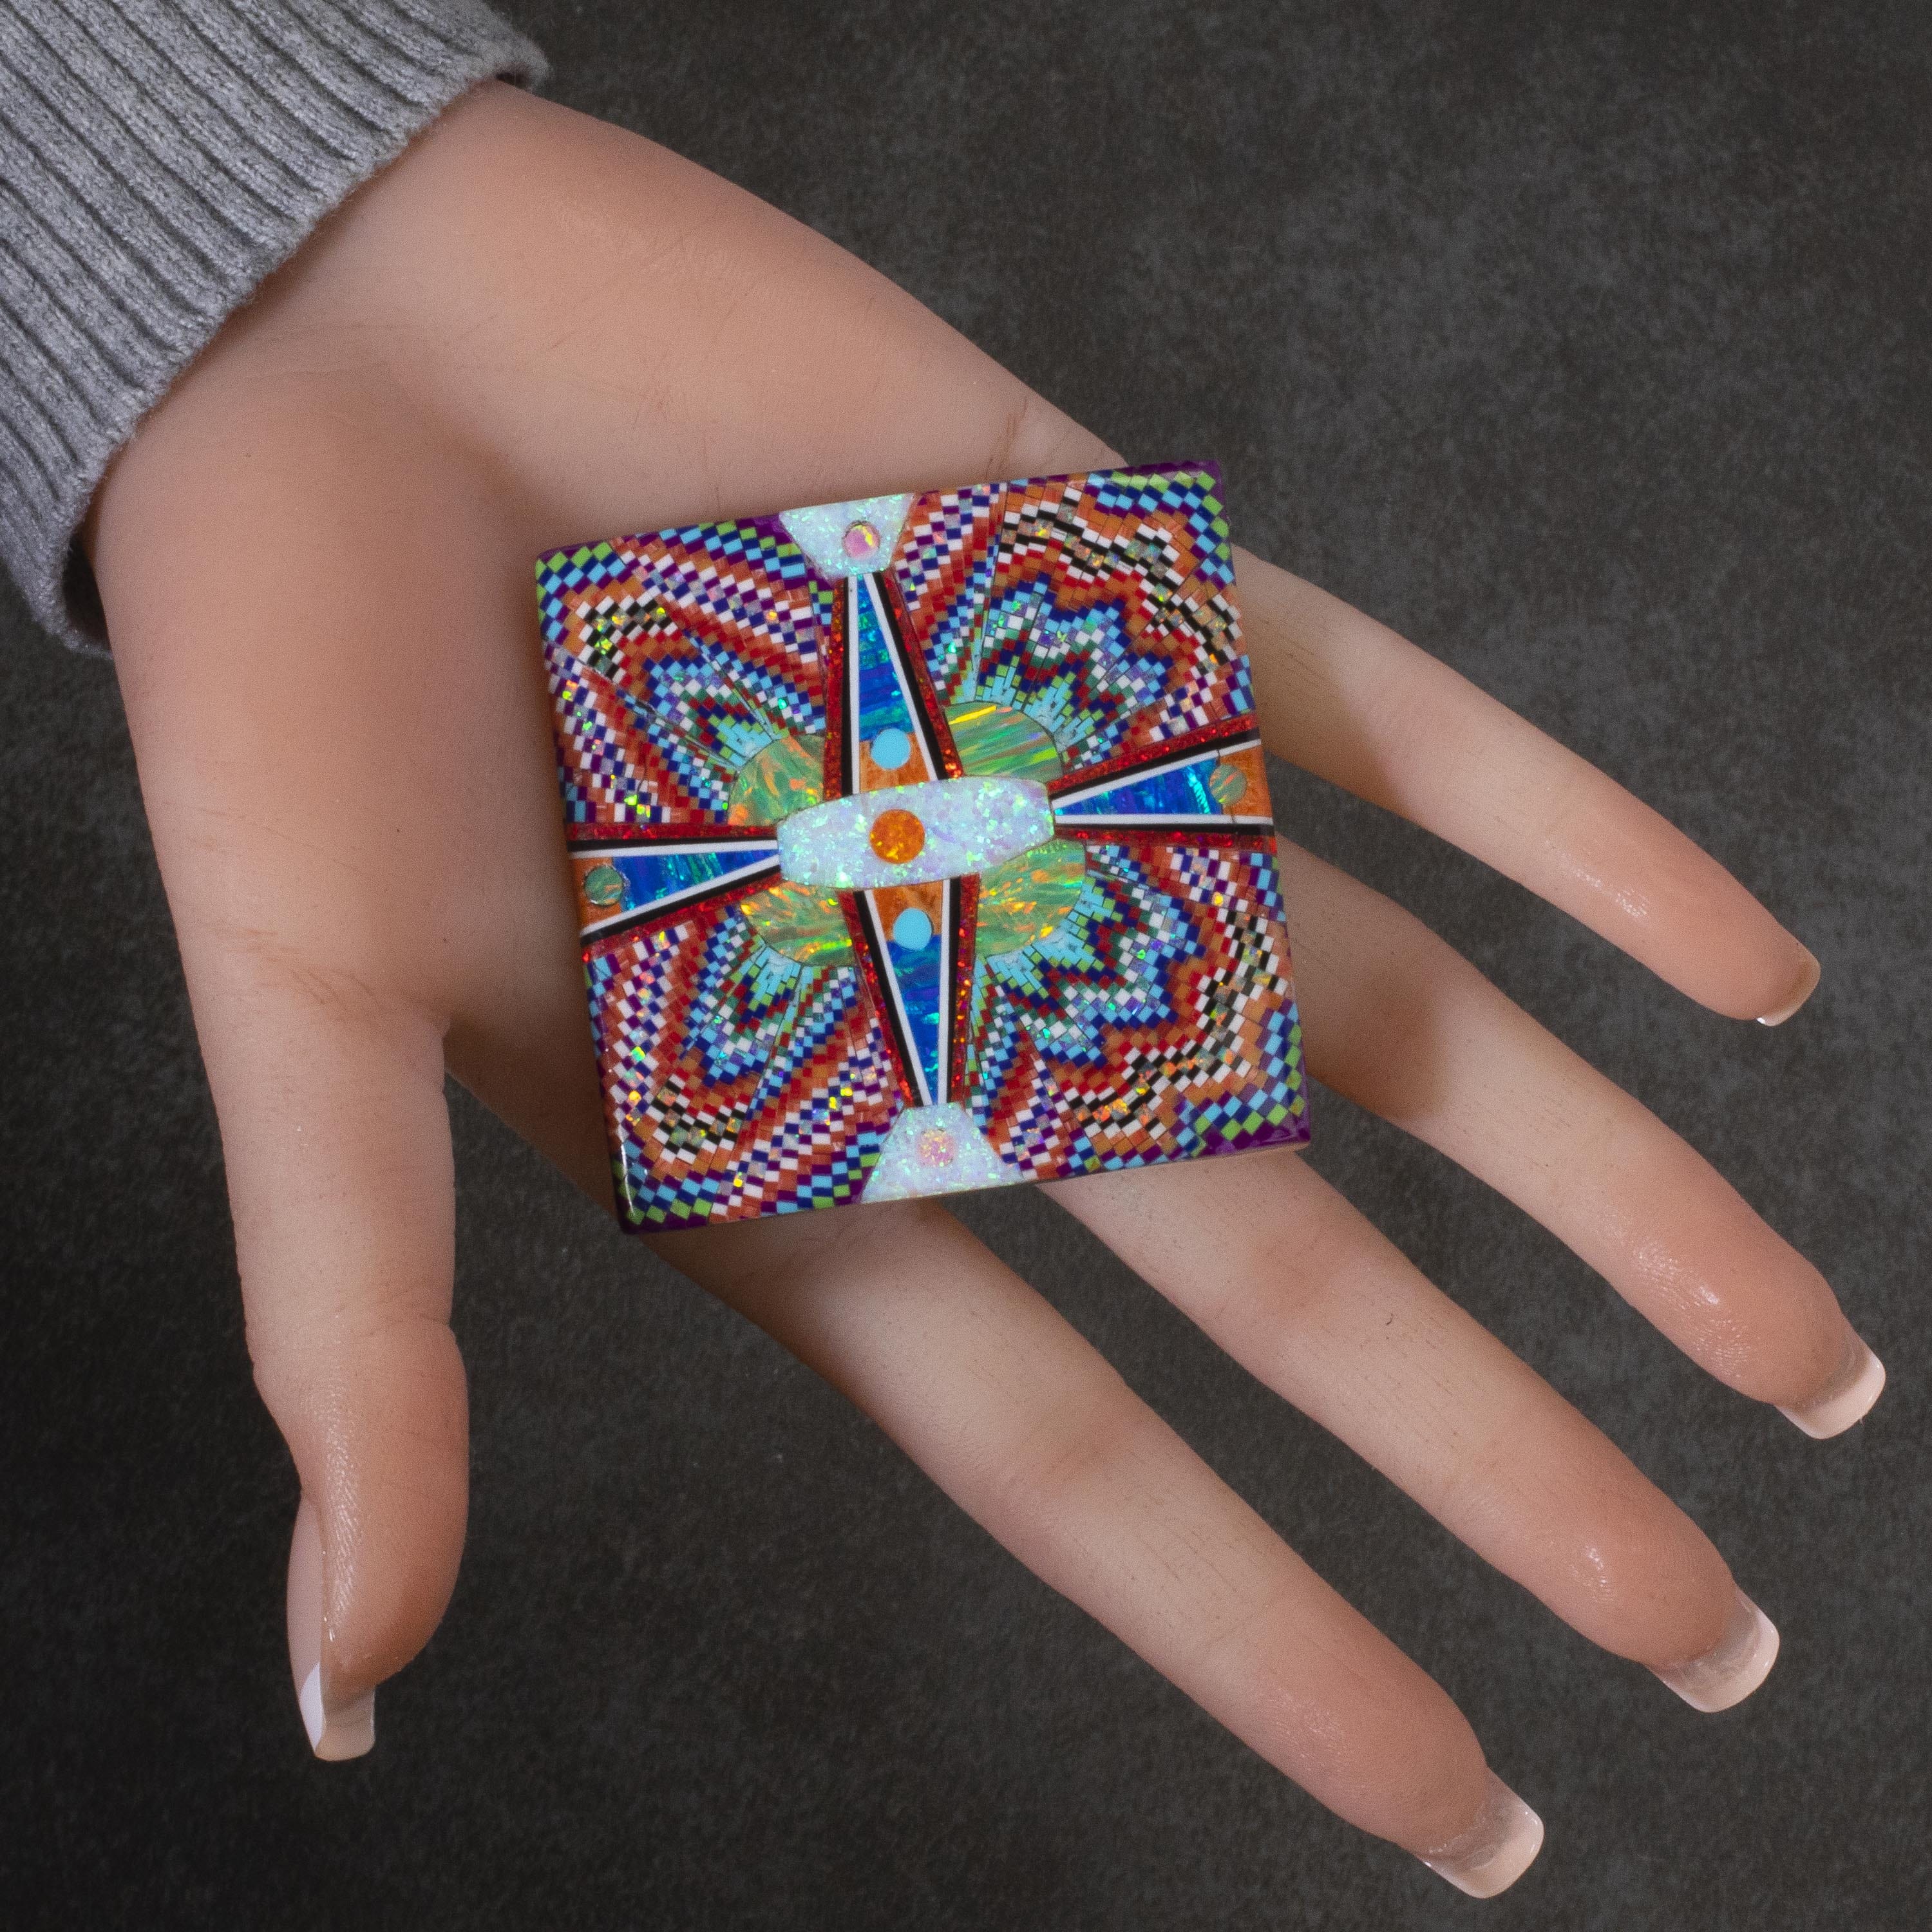 KALIFANO Southwest Silver Jewelry Multi Gem Opal Micro Inlay with Genuine Turquoise Handmade 925 Sterling Silver Square Belt Buckle AKBB1200.006